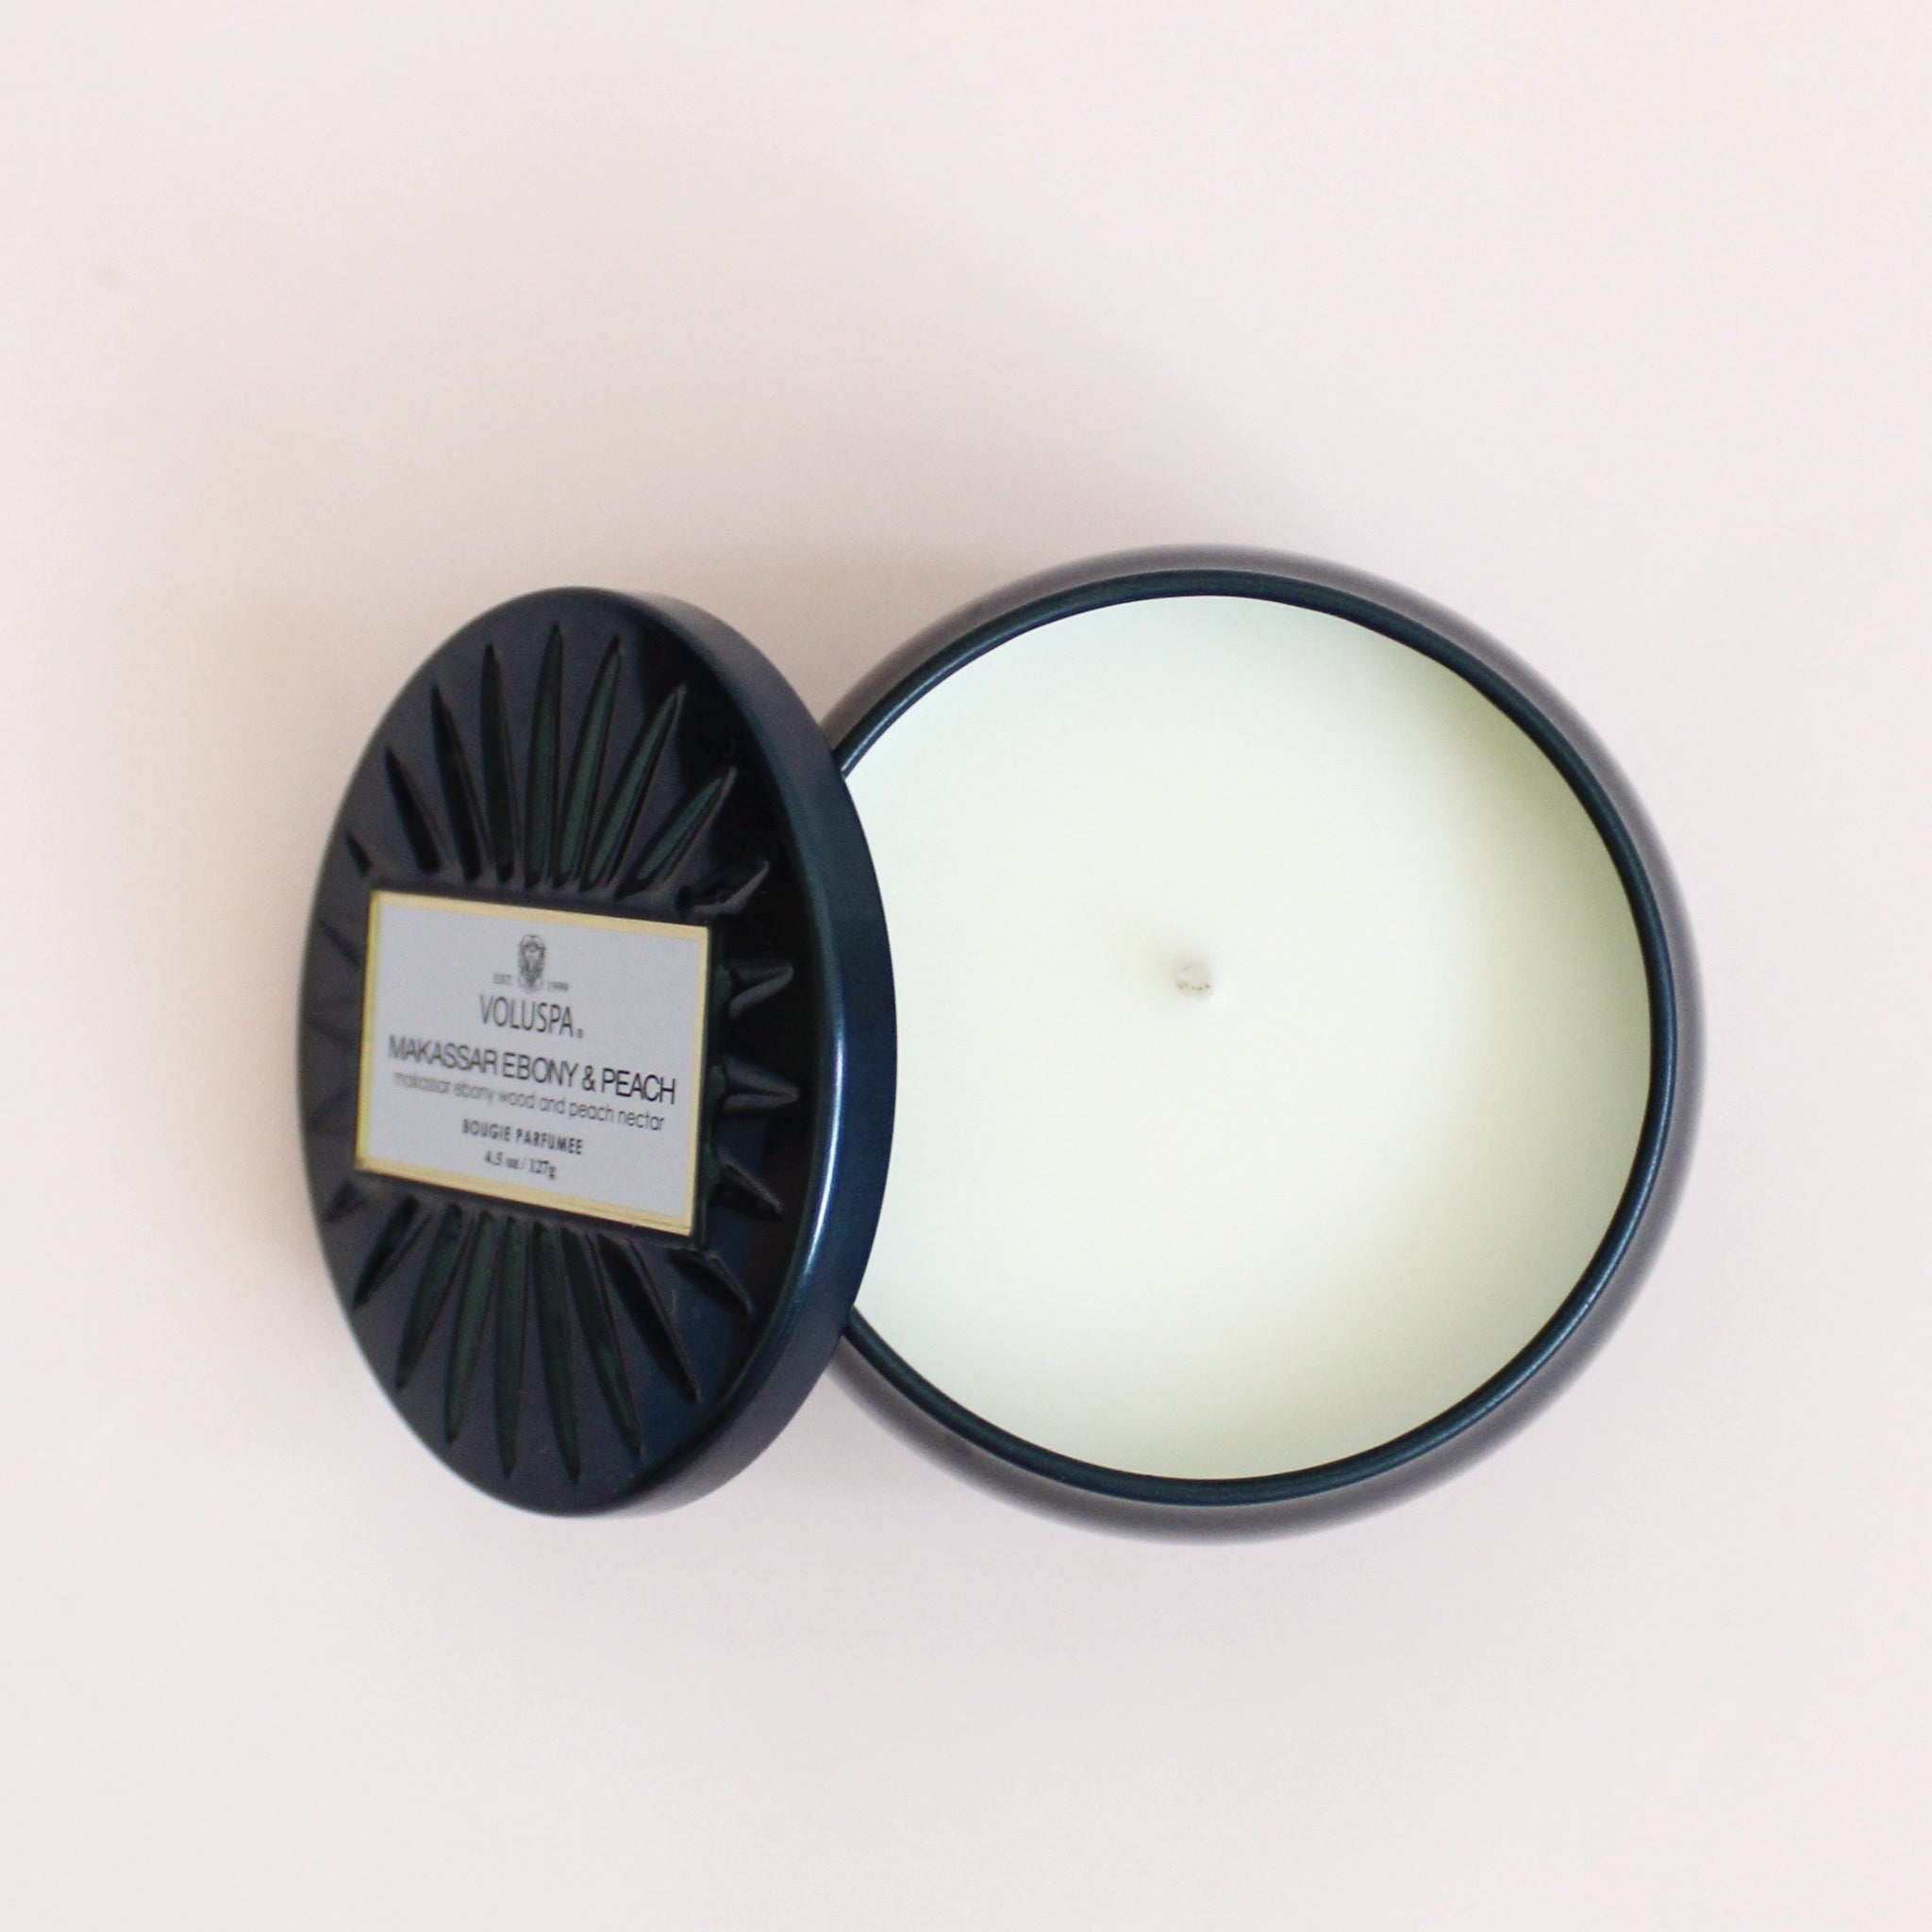 On a cream background is a round tin single wick candle in a navy blue shade along with a label on the lid that reads, &quot;Voluspa Makassar Ebony &amp; Peach&quot;.